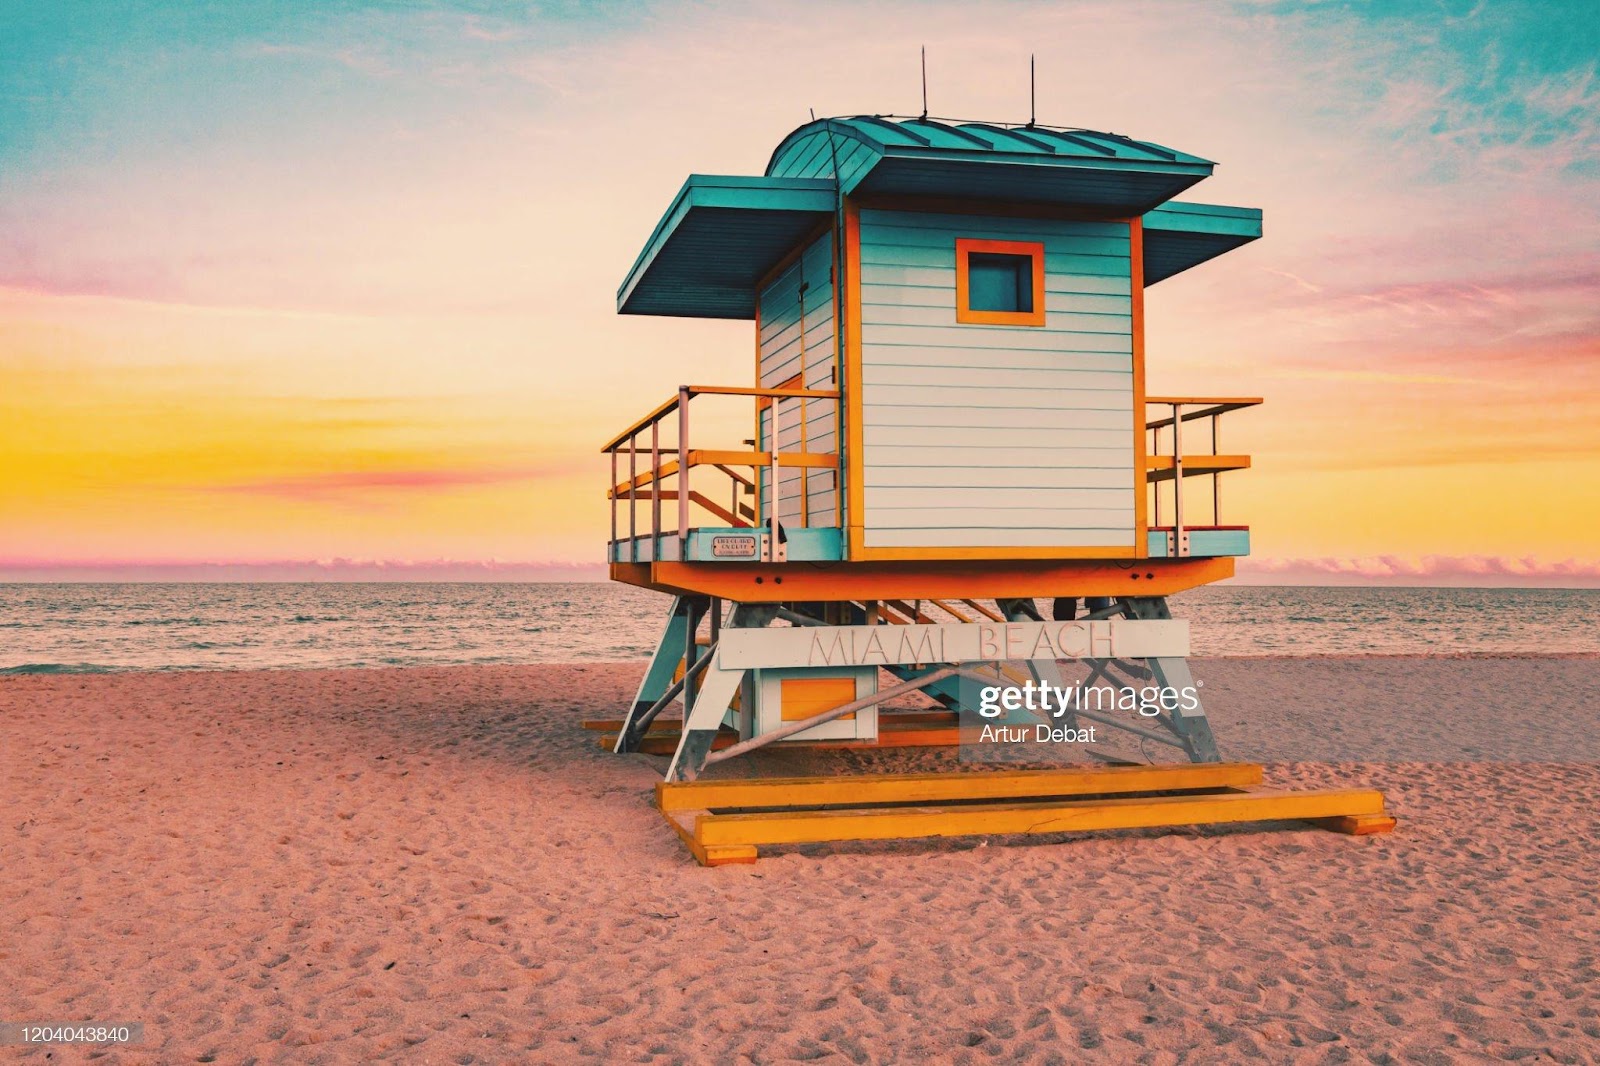 C:\Users\Valerio\Desktop\New folder\colorful-miami-beach-lifeguard-tower-with-stunning-sunset-sky-and-picture-id1204043840.jpg